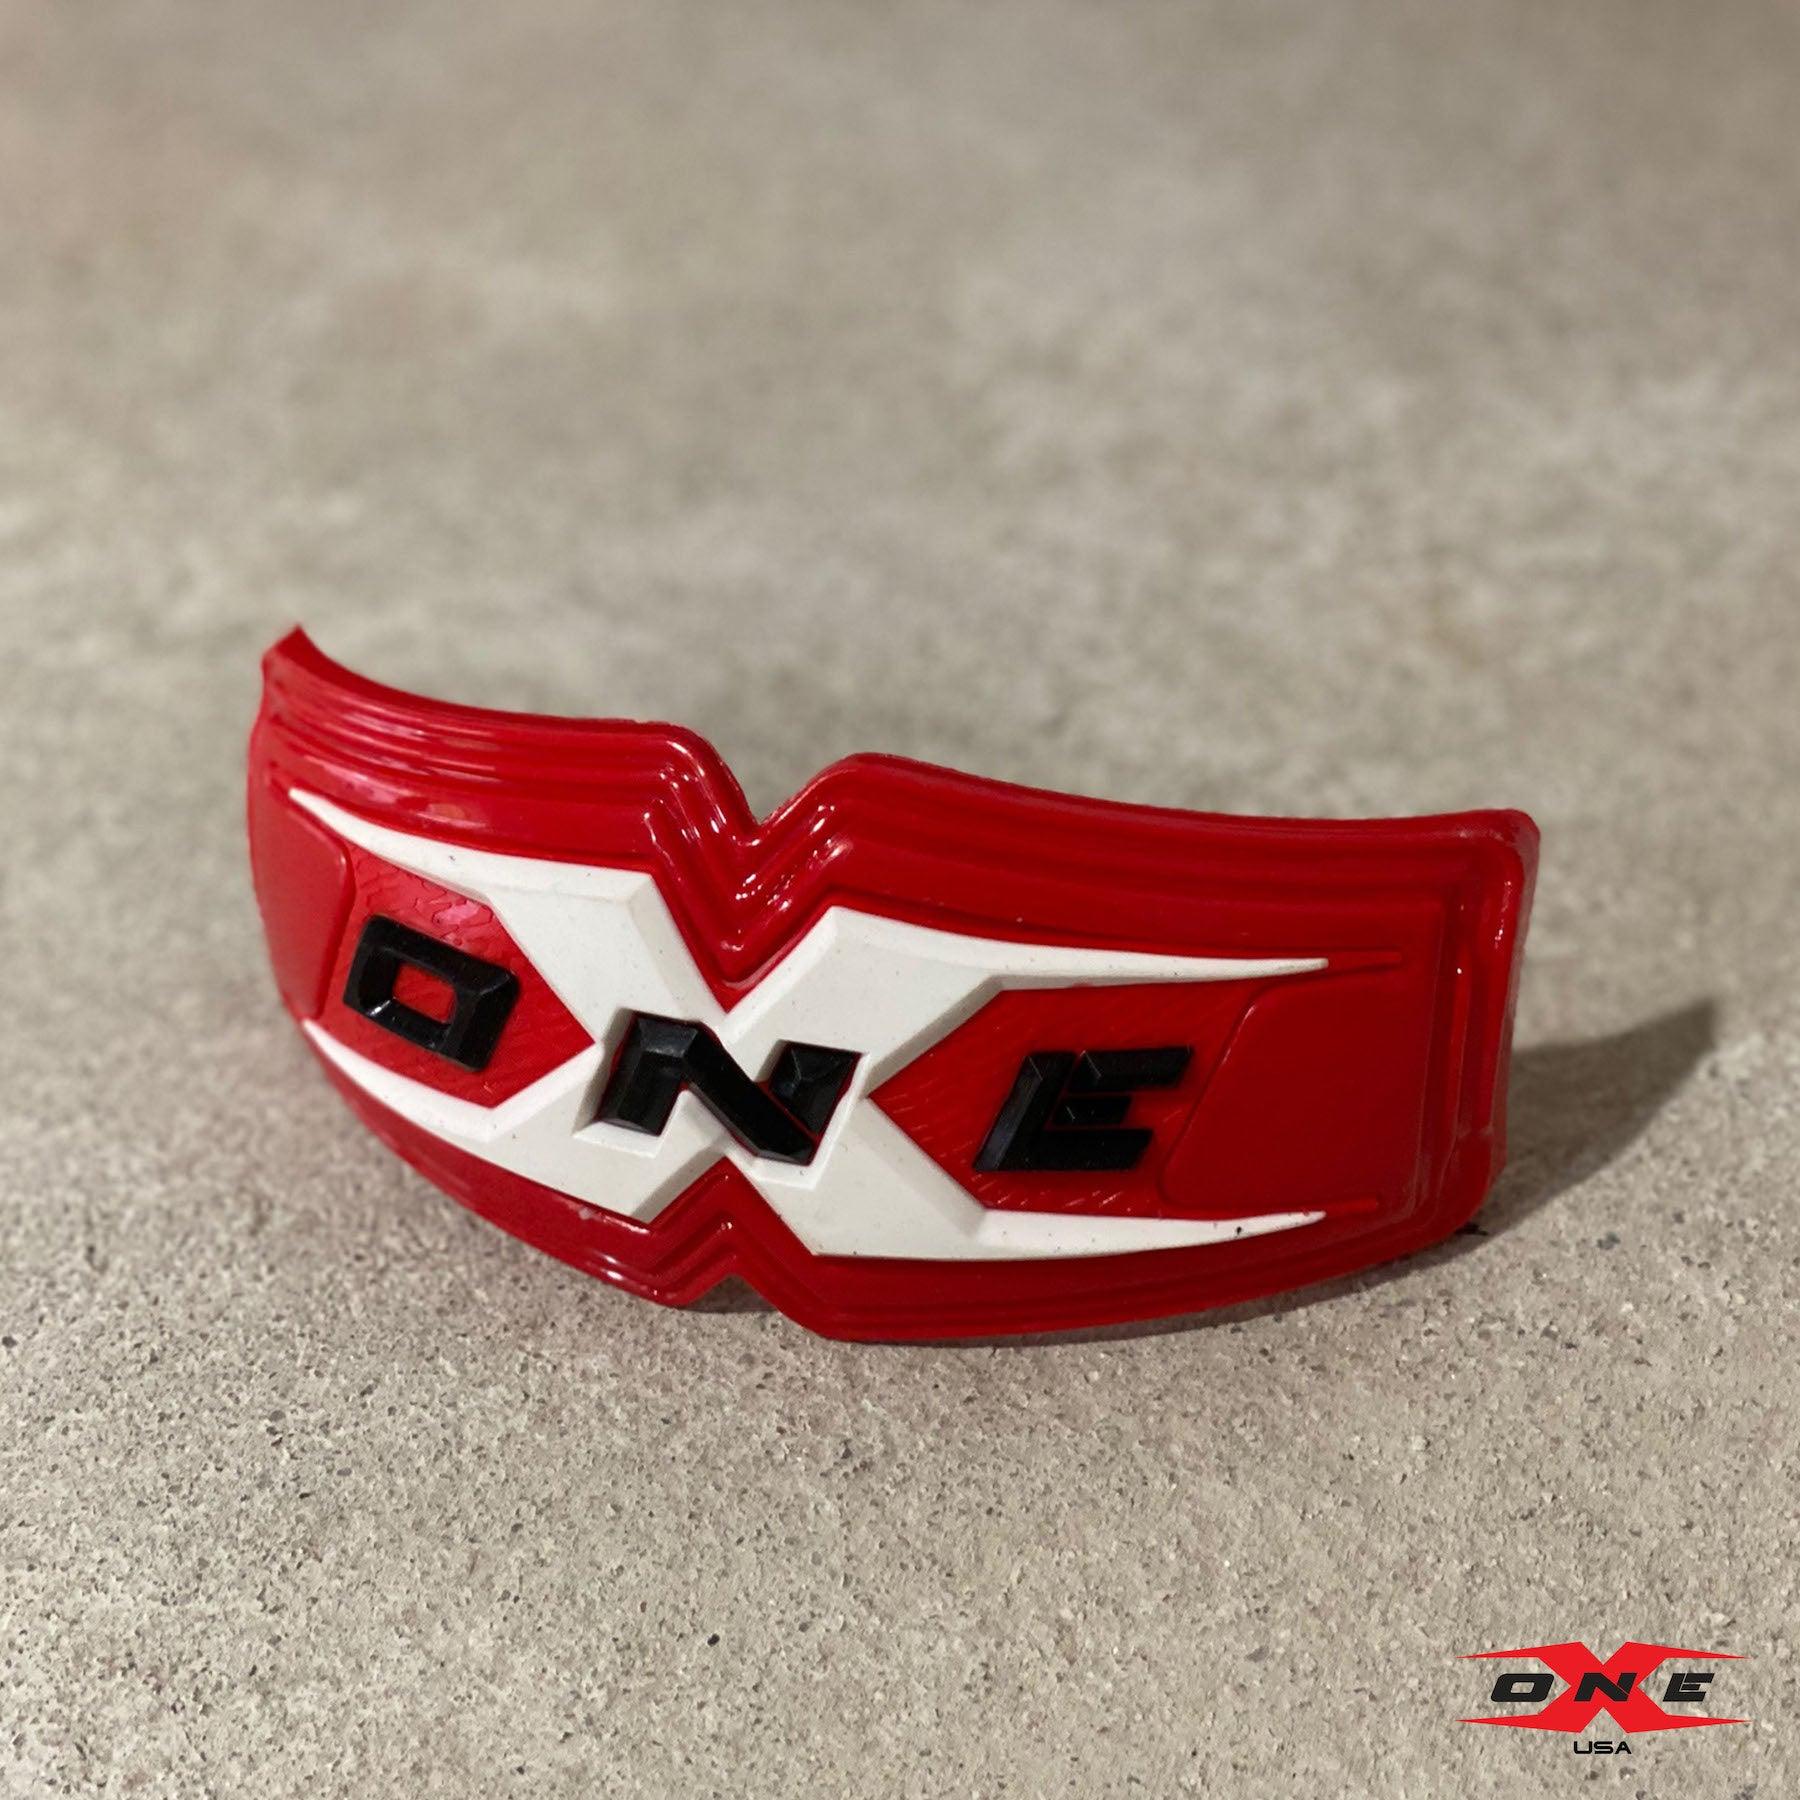 OneX USA RACE SUIT REPLACEMENT SHOULDER GUARD - RED - OneX USA